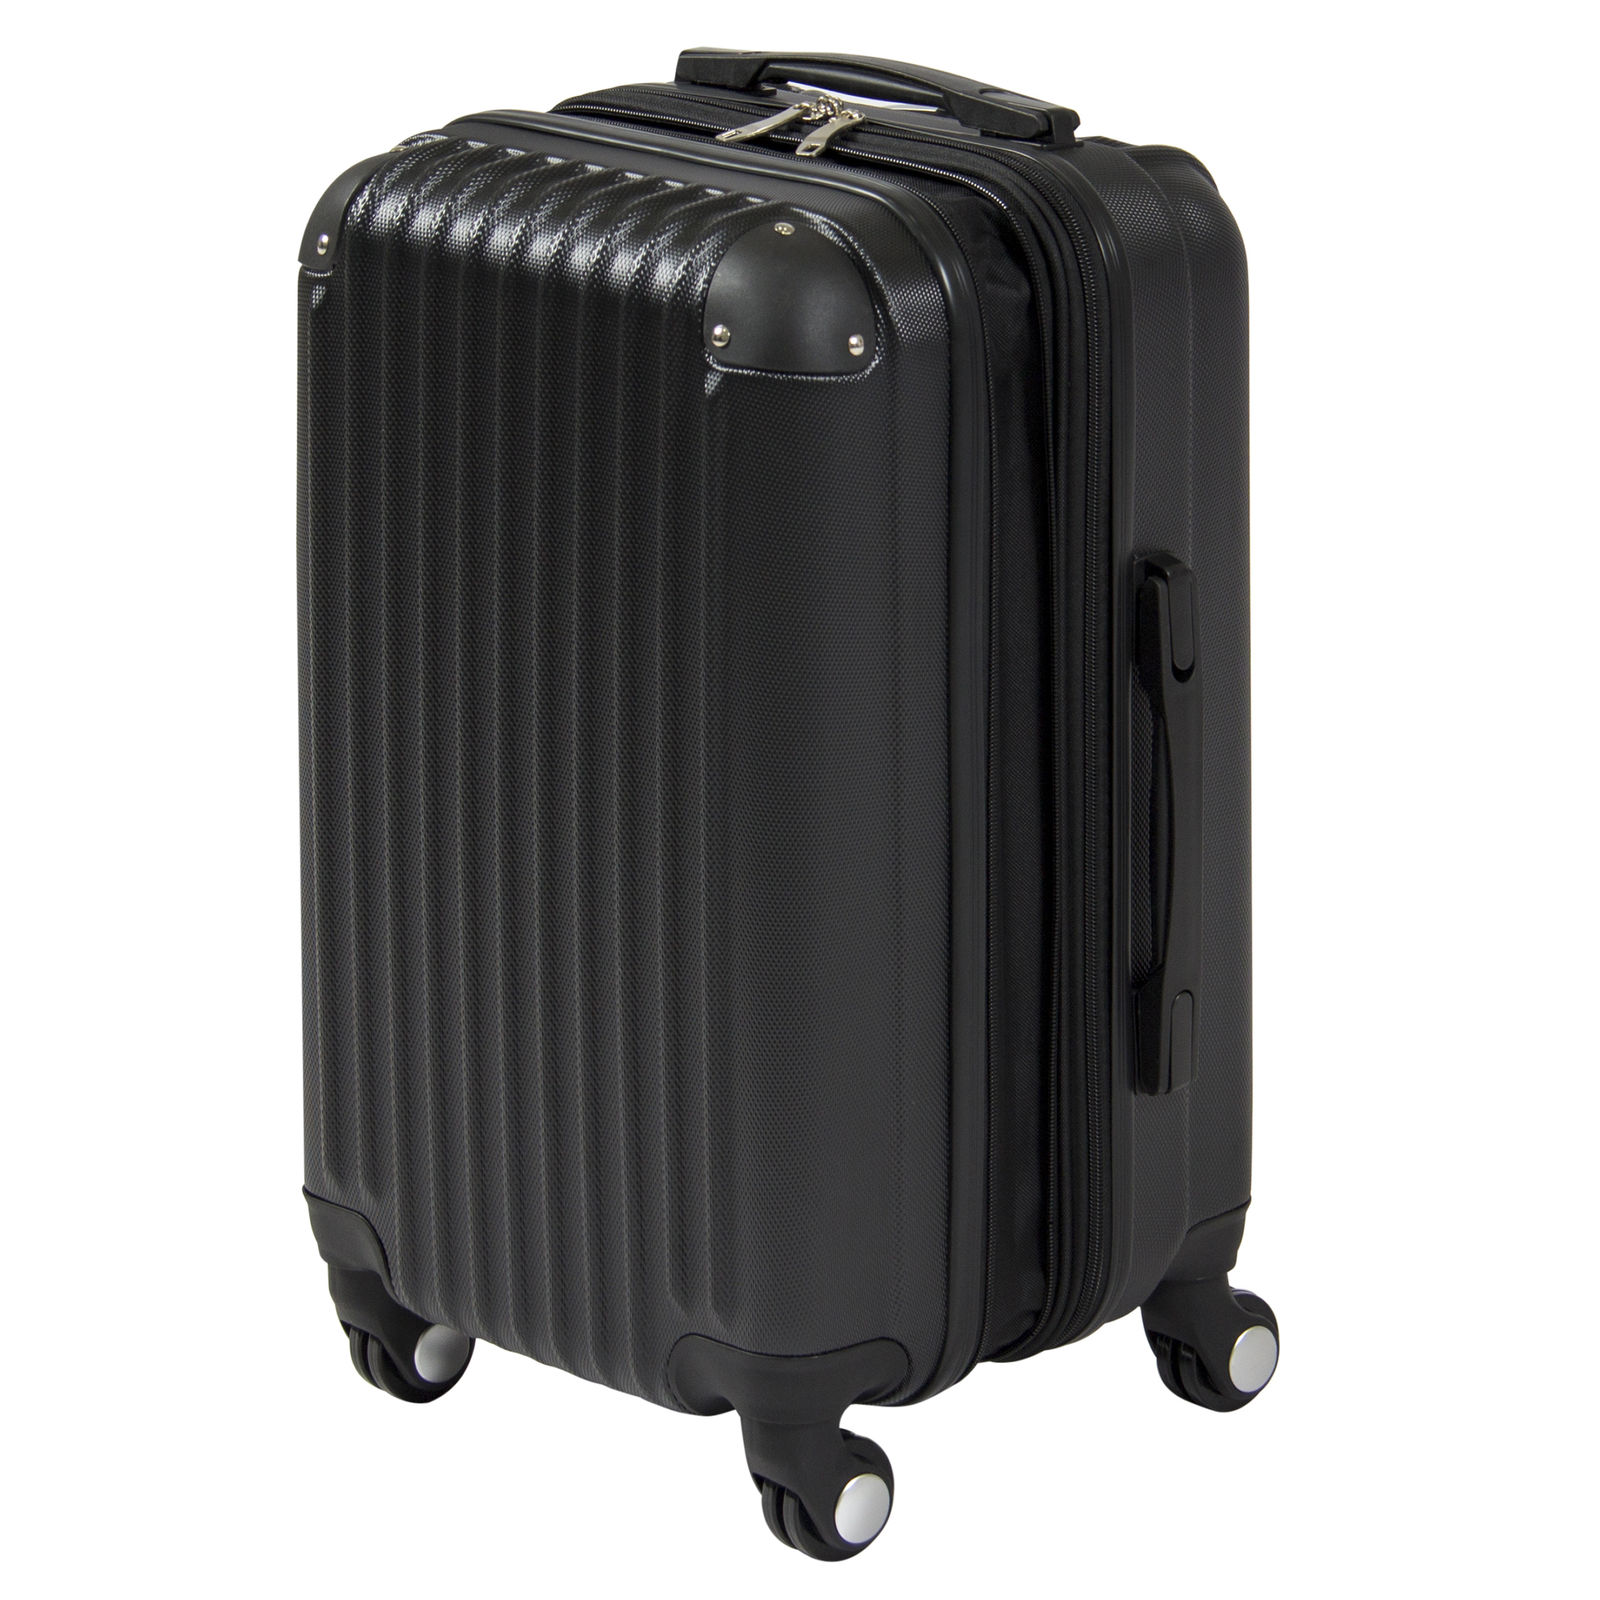 BCP 20″ hardshell expandable carry on spinner luggage for $30, free shipping